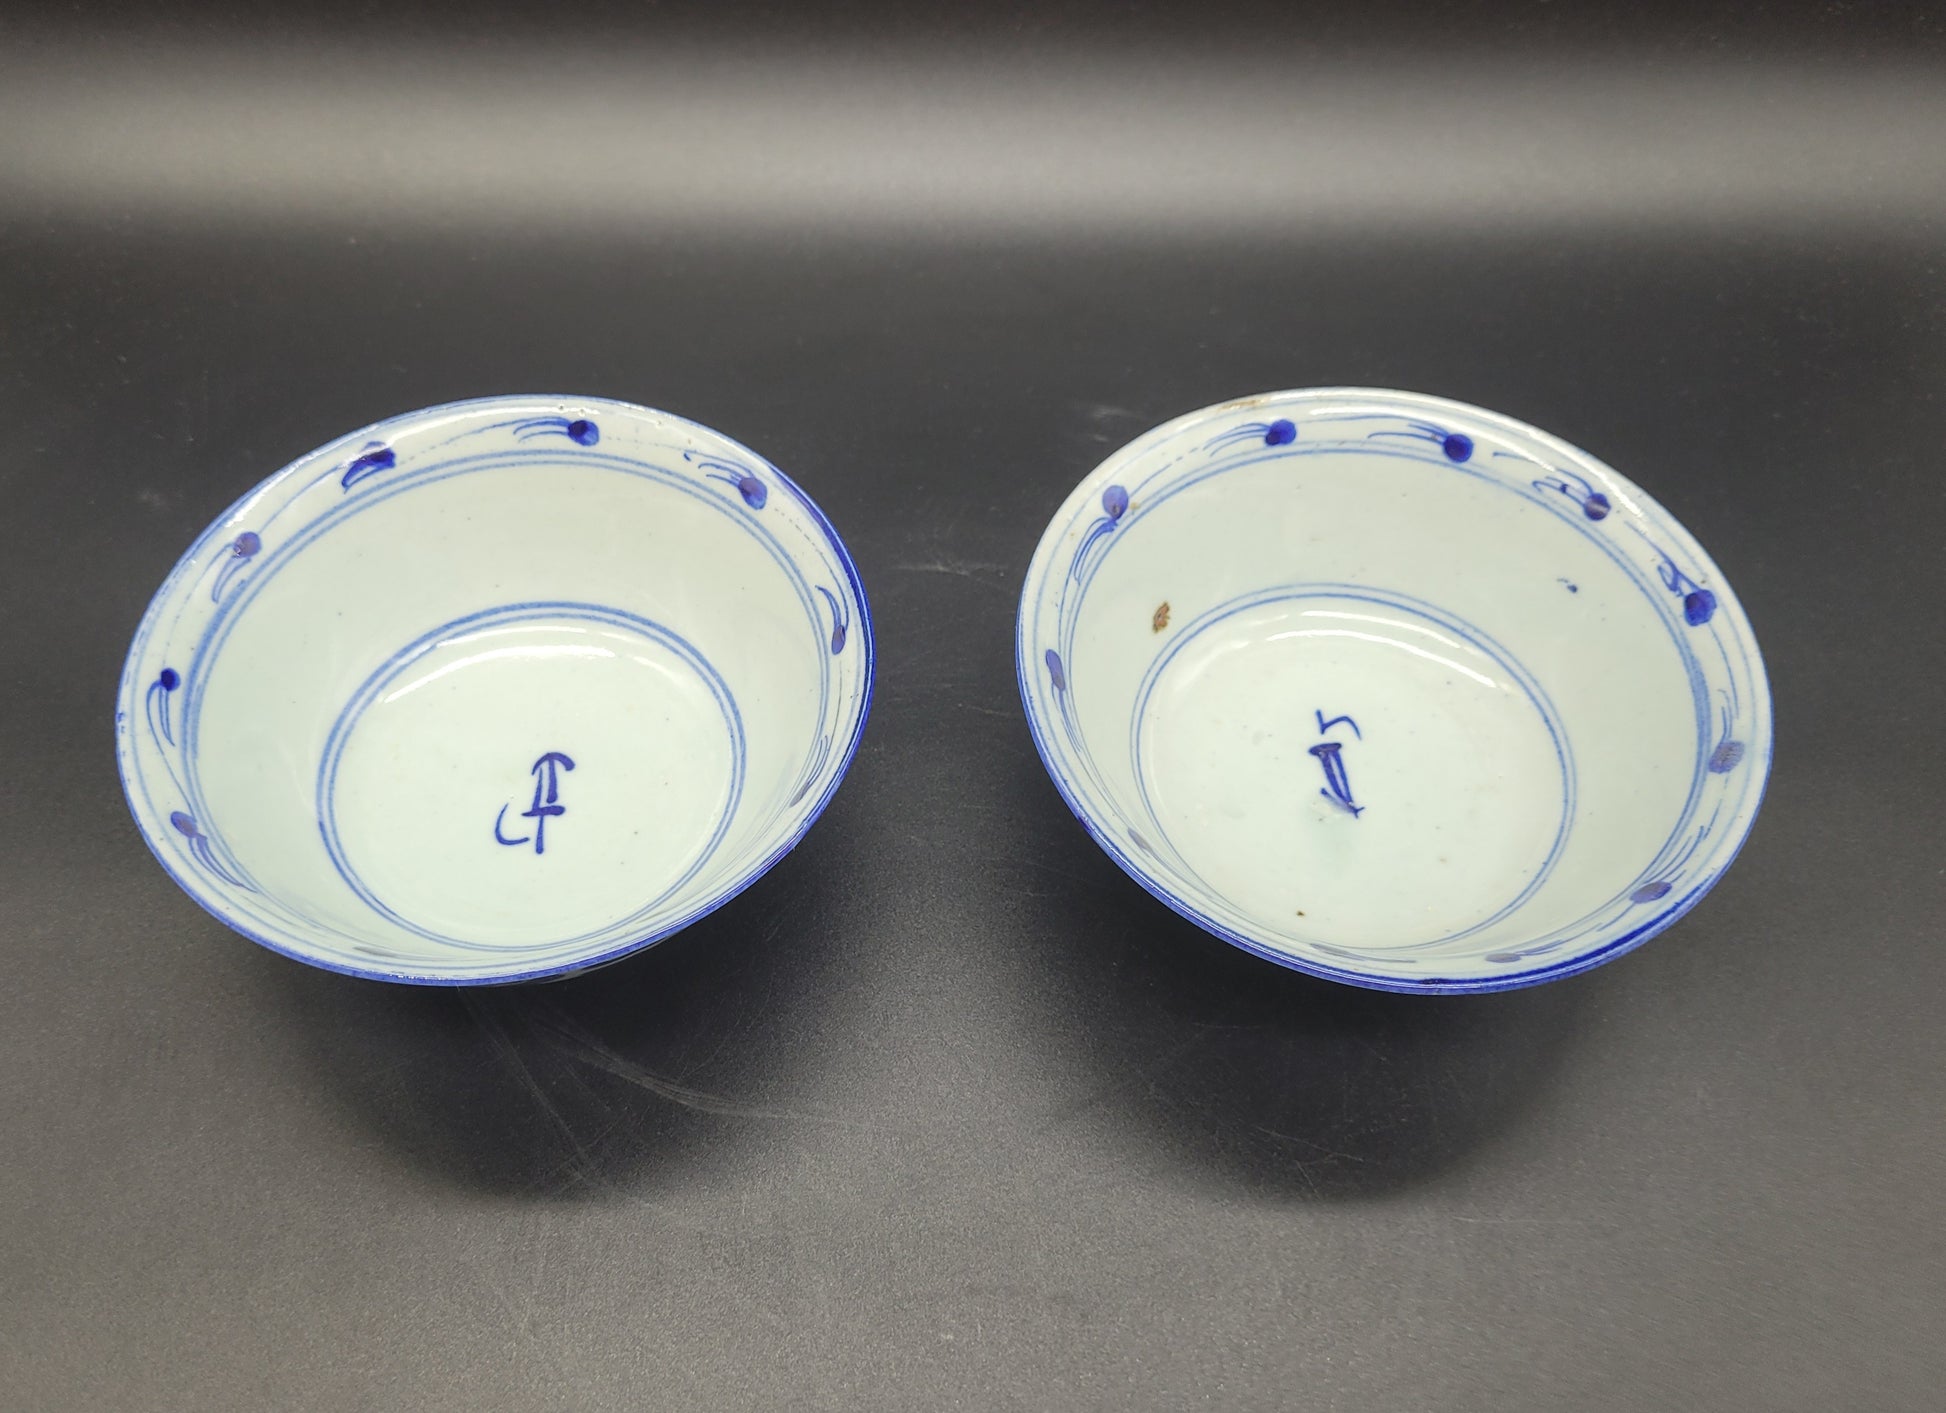 ANTIQUES & COLLECTABLES UK Two Chinese Qing Porcelain Bowls 18th Century Blue / White